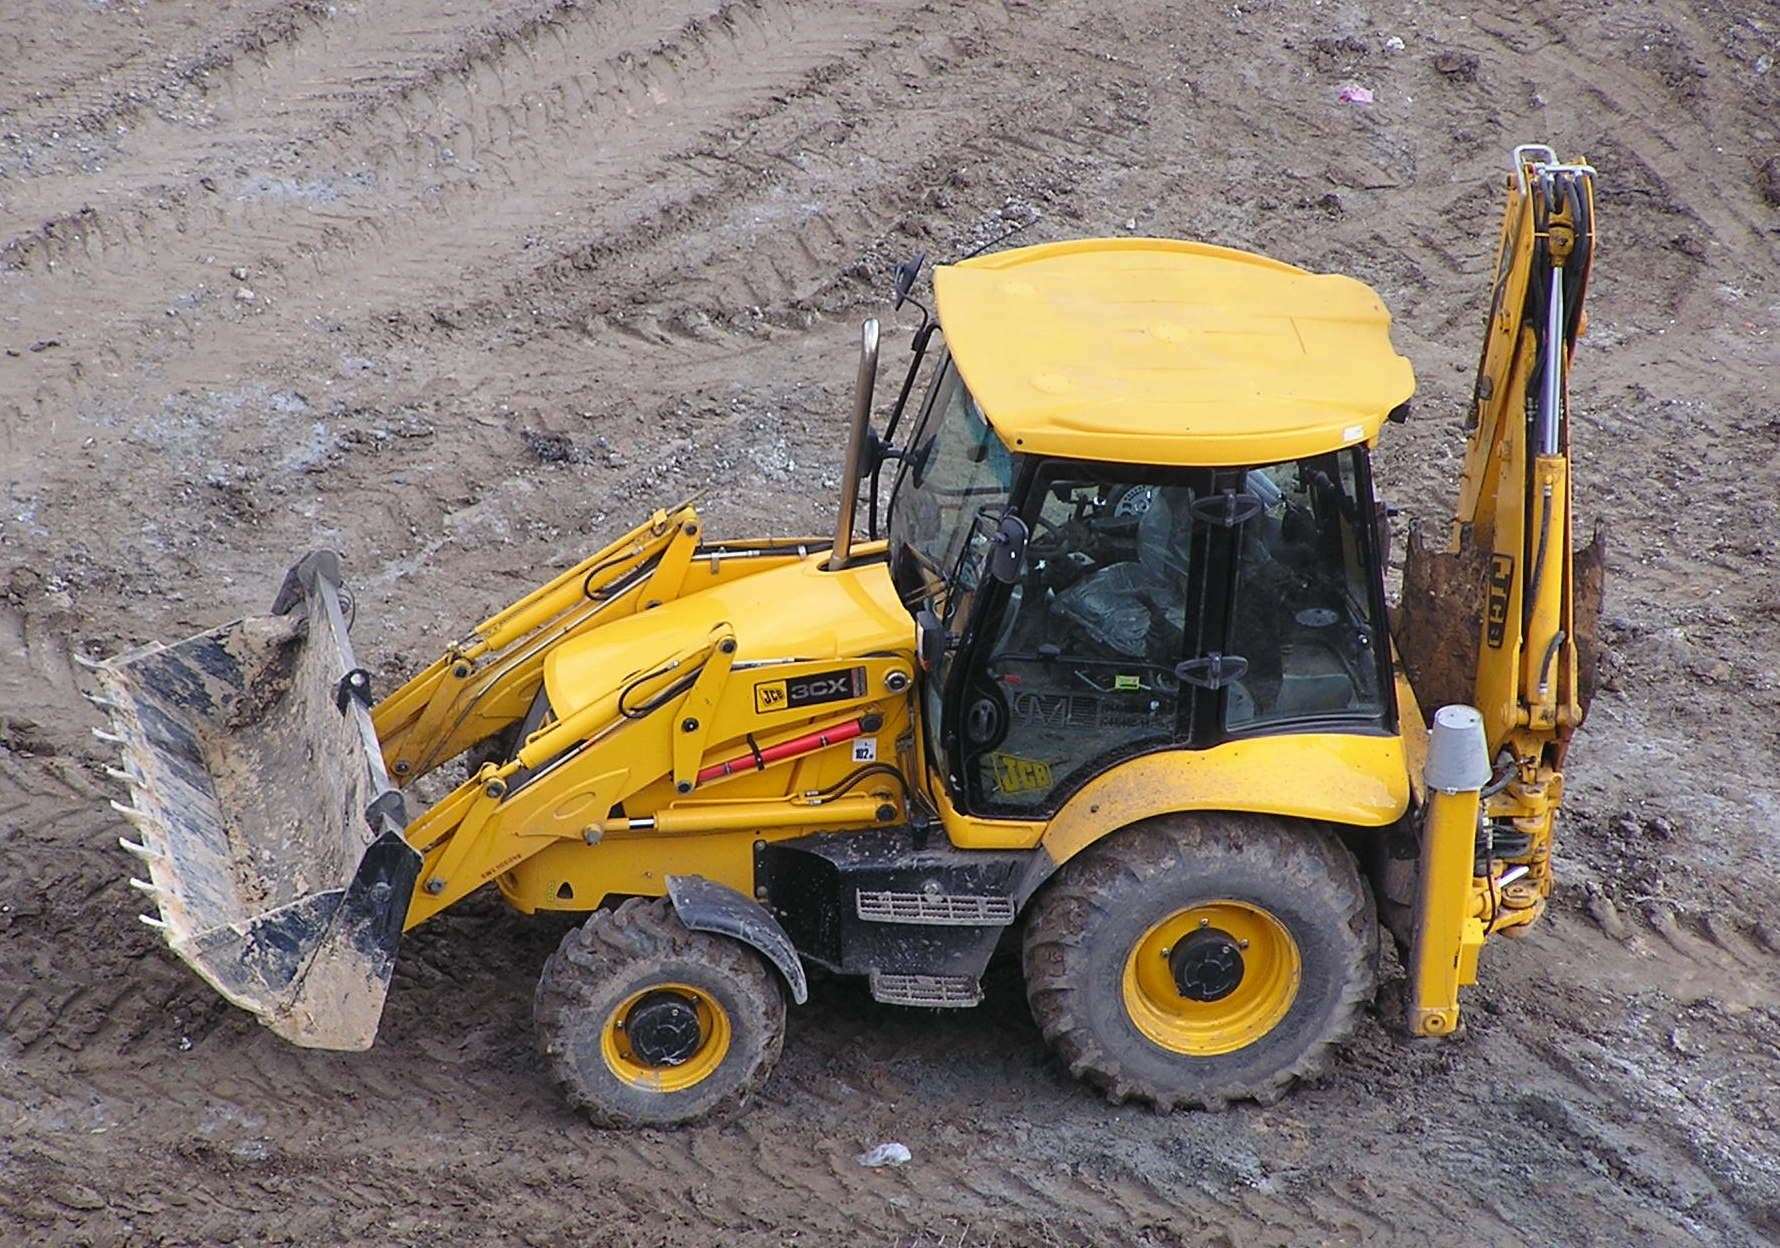 The employee had half his body run over by a JCB. Stock image